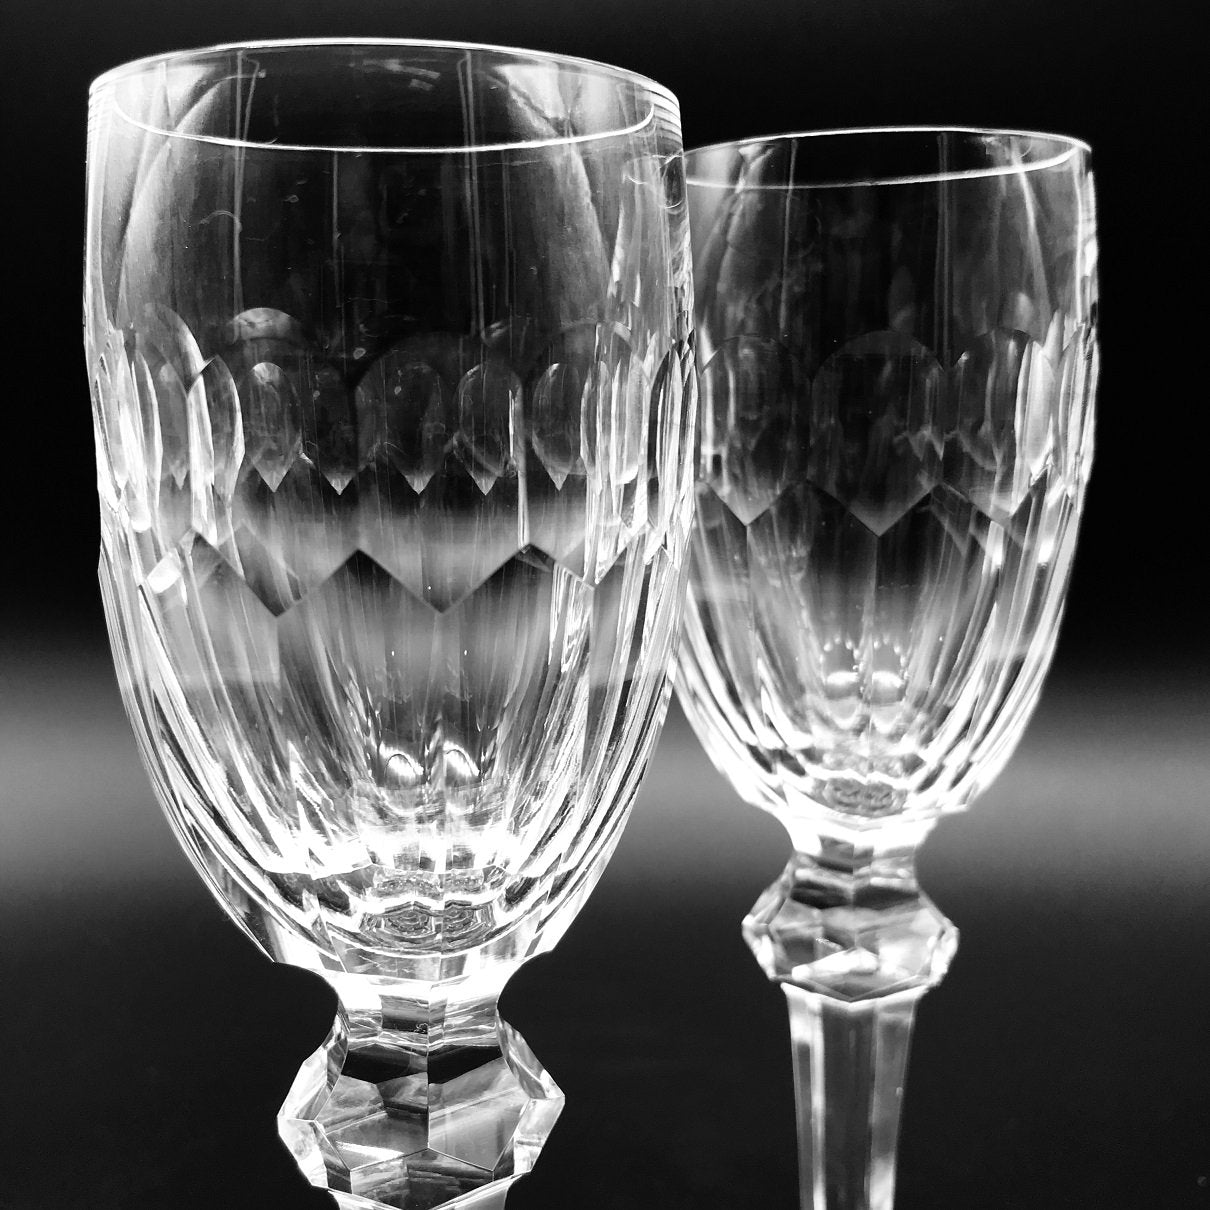 Waterford Crystal Curraghmore Sherry Pair  Curraghmore is inspired by the stately manor house in Curraghmore and features elegant crystal cuts that add a brilliant touch to any table. Hand-washing is recommended.